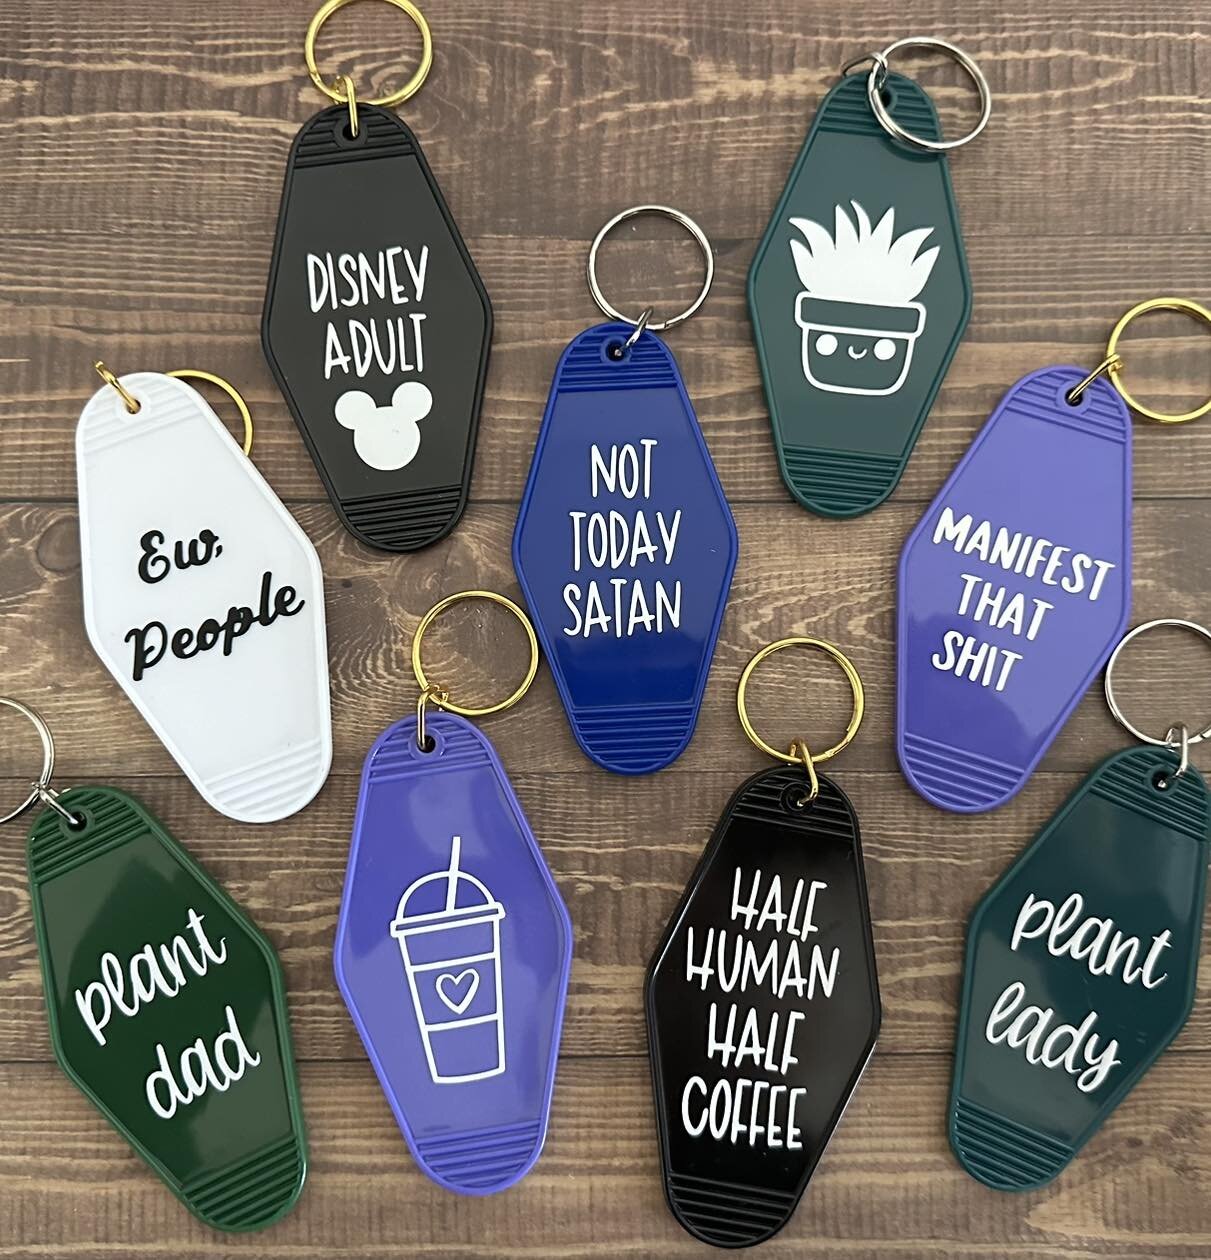 Y&rsquo;all, market season is about to start back up and I can&rsquo;t wait to see y&rsquo;all&rsquo;s lovely faces again!

Have you guys seen our hotel keychains? These and some new ones will be available at our markets and they&rsquo;re coming soon